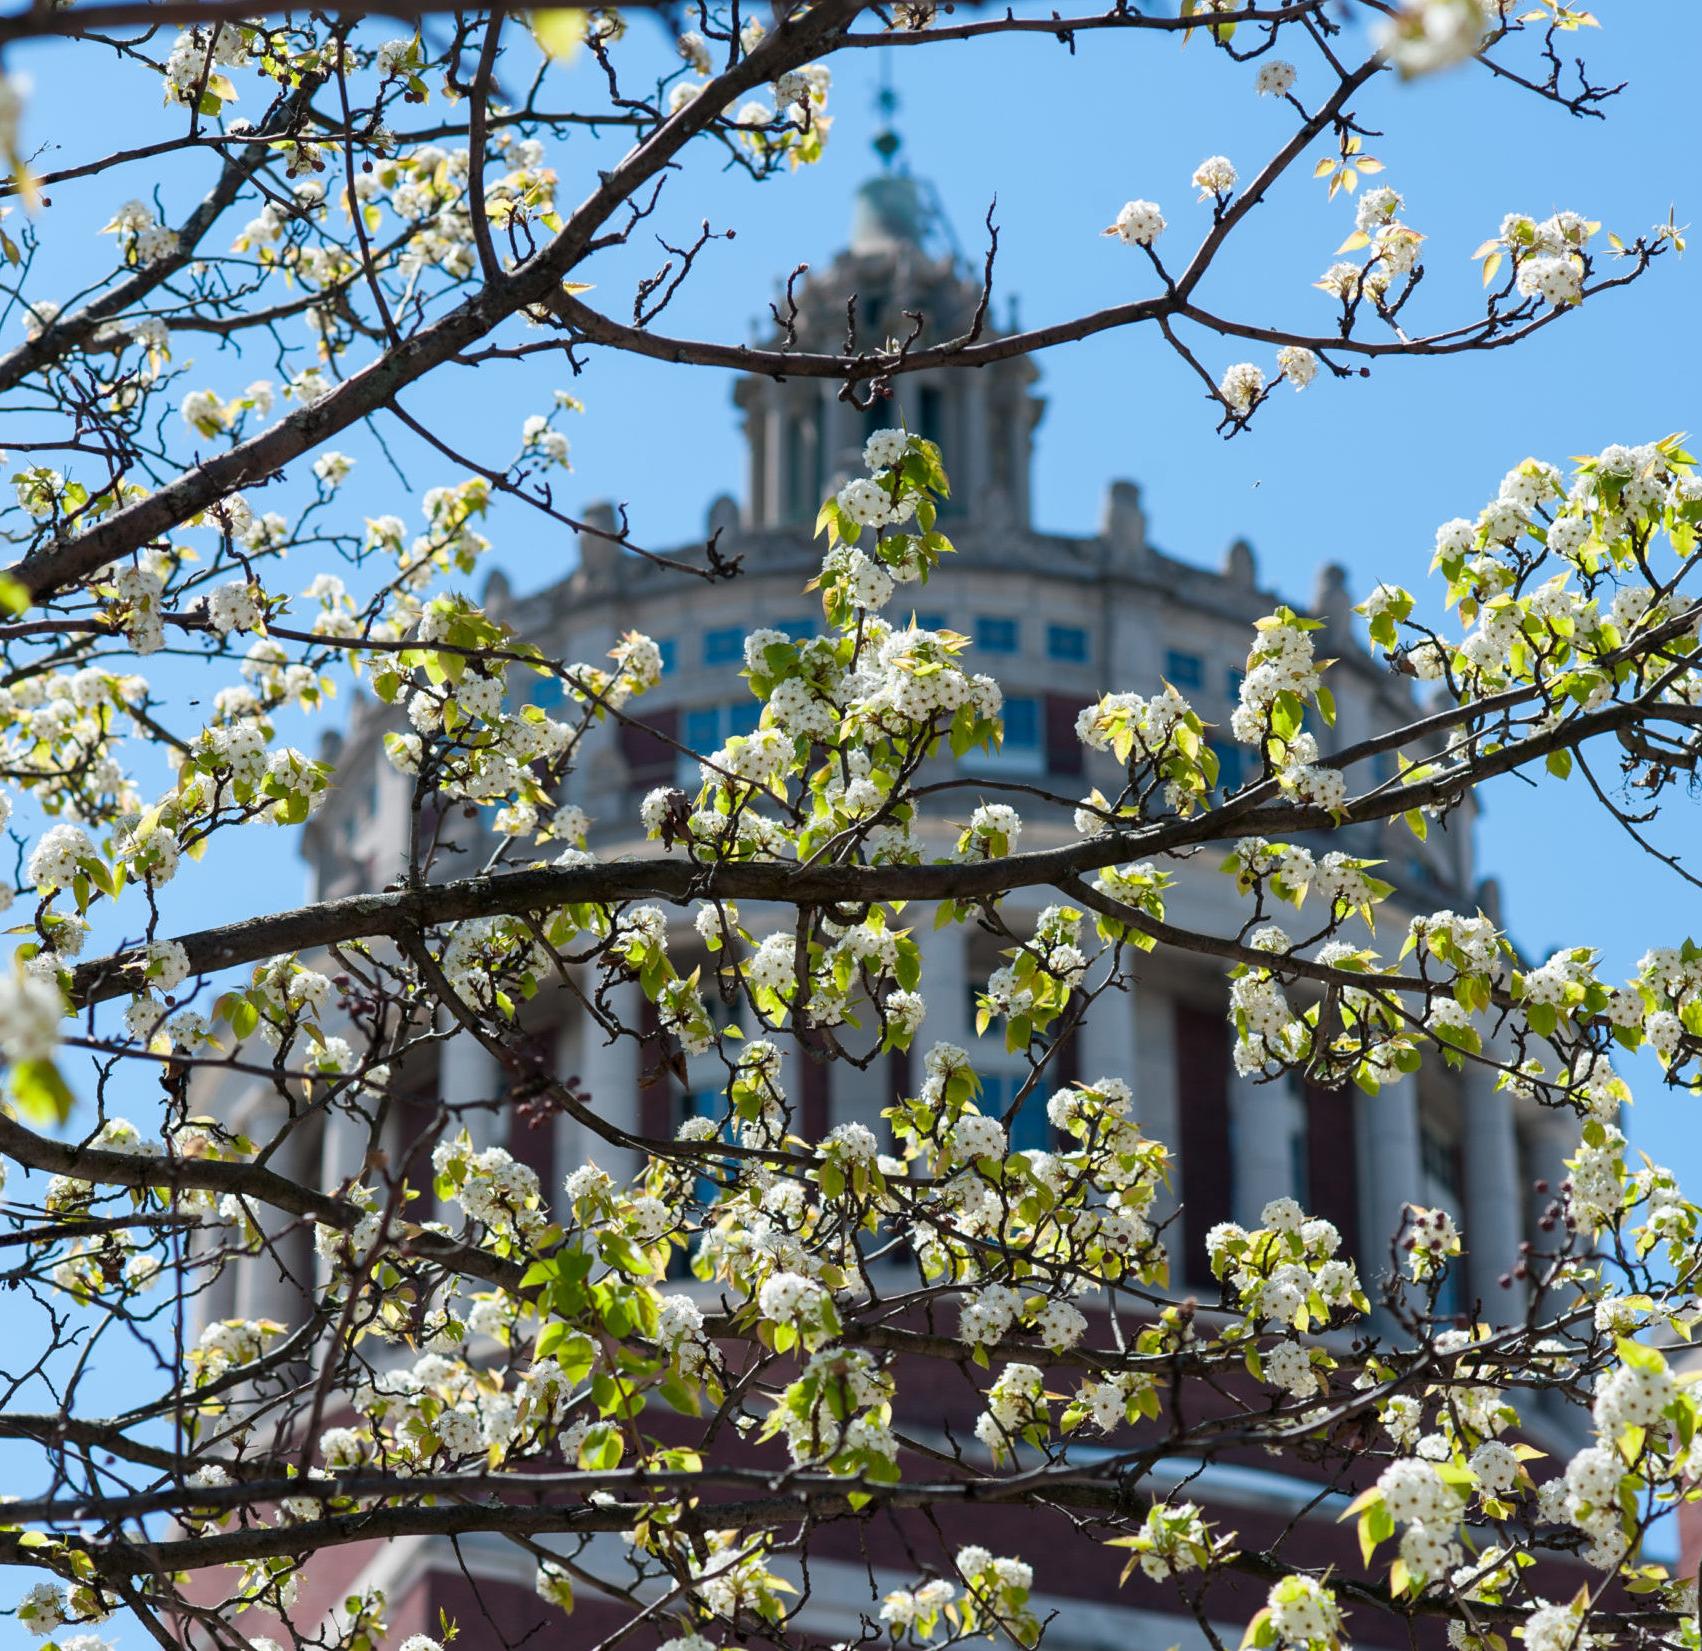 Rush Rhees Library through flowering trees at University of Rochester River Campus